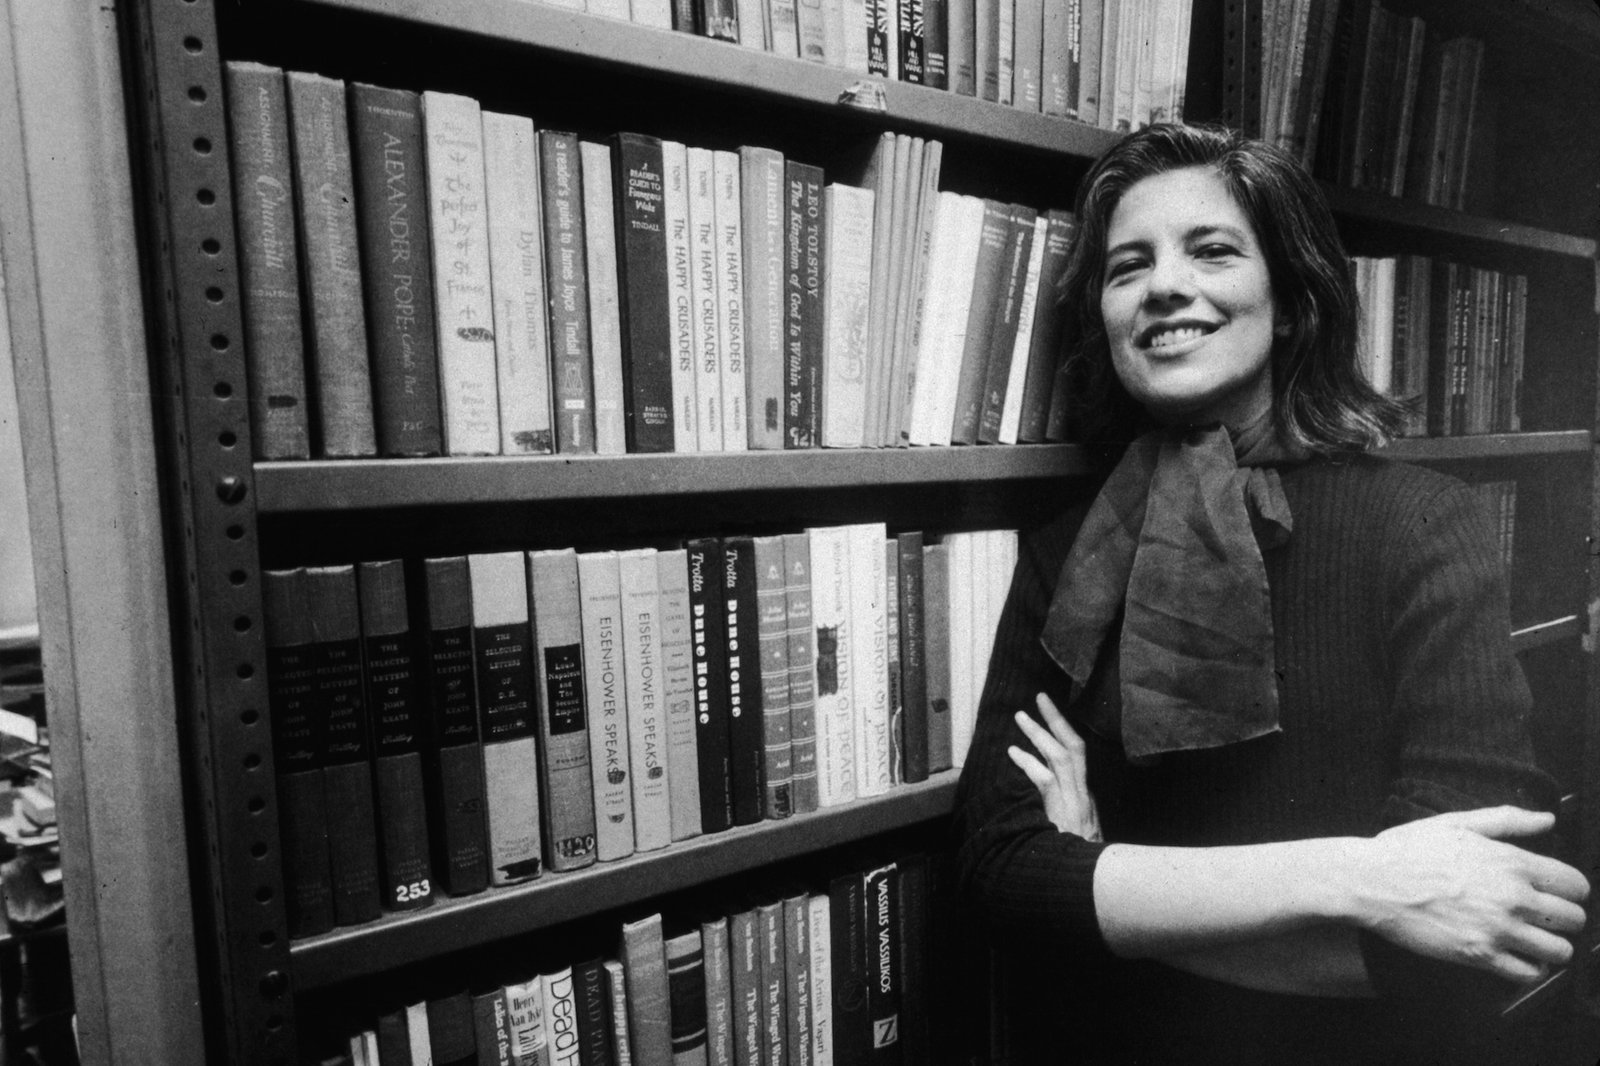 Portrait of American author and critic Susan Sontag (1933 - 2004) smiles broadly as she leans, arms crossed, against a bookshelf in the offices of her publisher, Farrar, Straus, and Giroux, New York, New York, January 23, 1978. (Photo by William E. Sauro/New York Times Co./Getty Images)